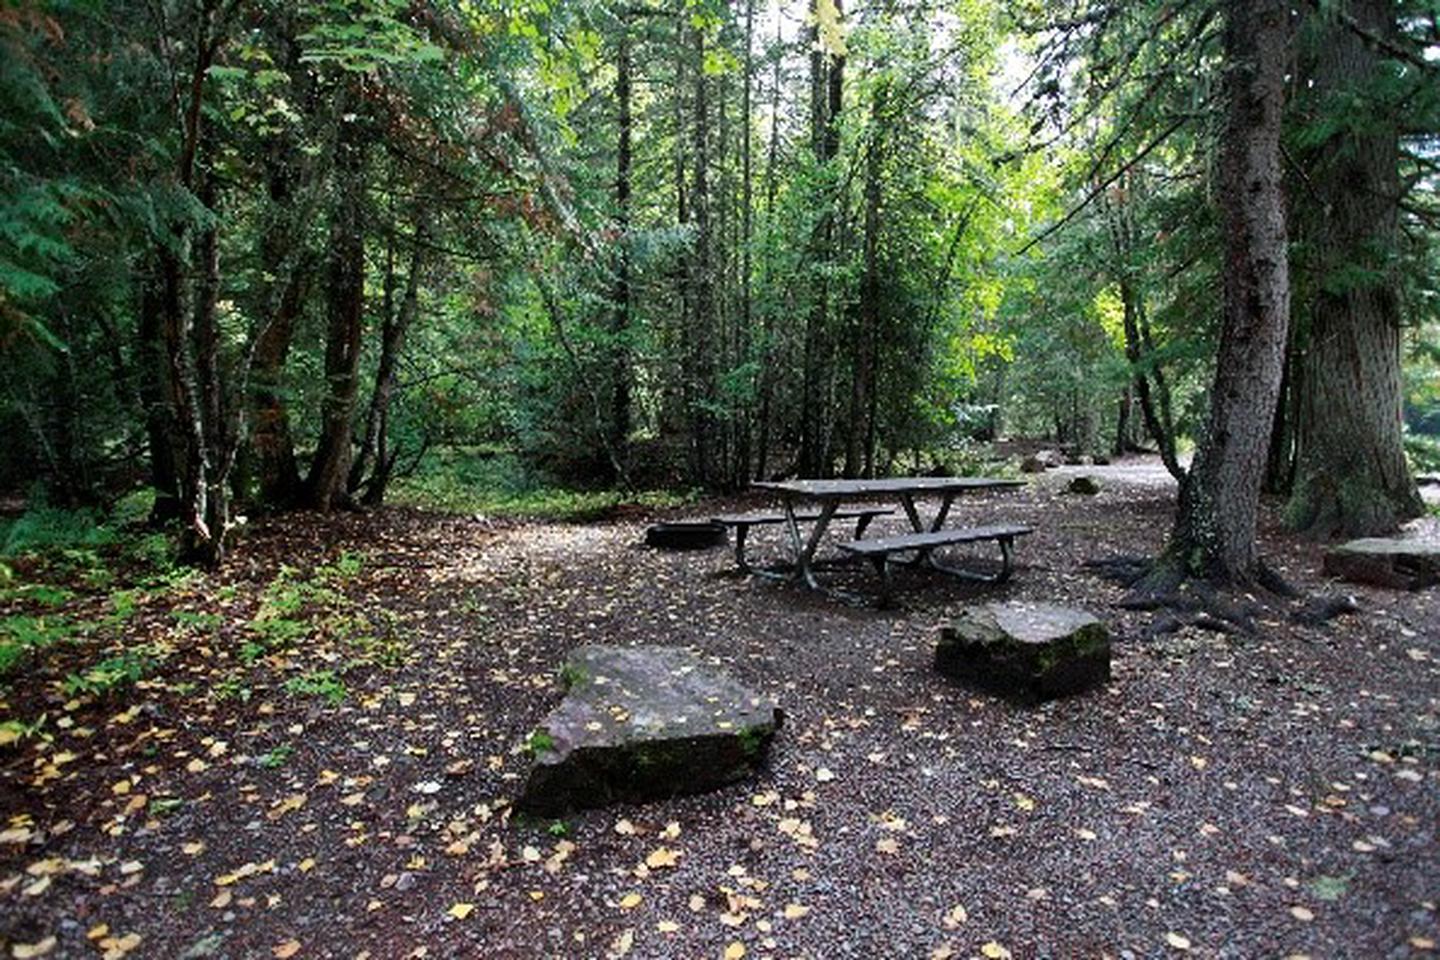 Gravel driveway covered with brown leaves in a wooded campsite with picnic table and fire ring.